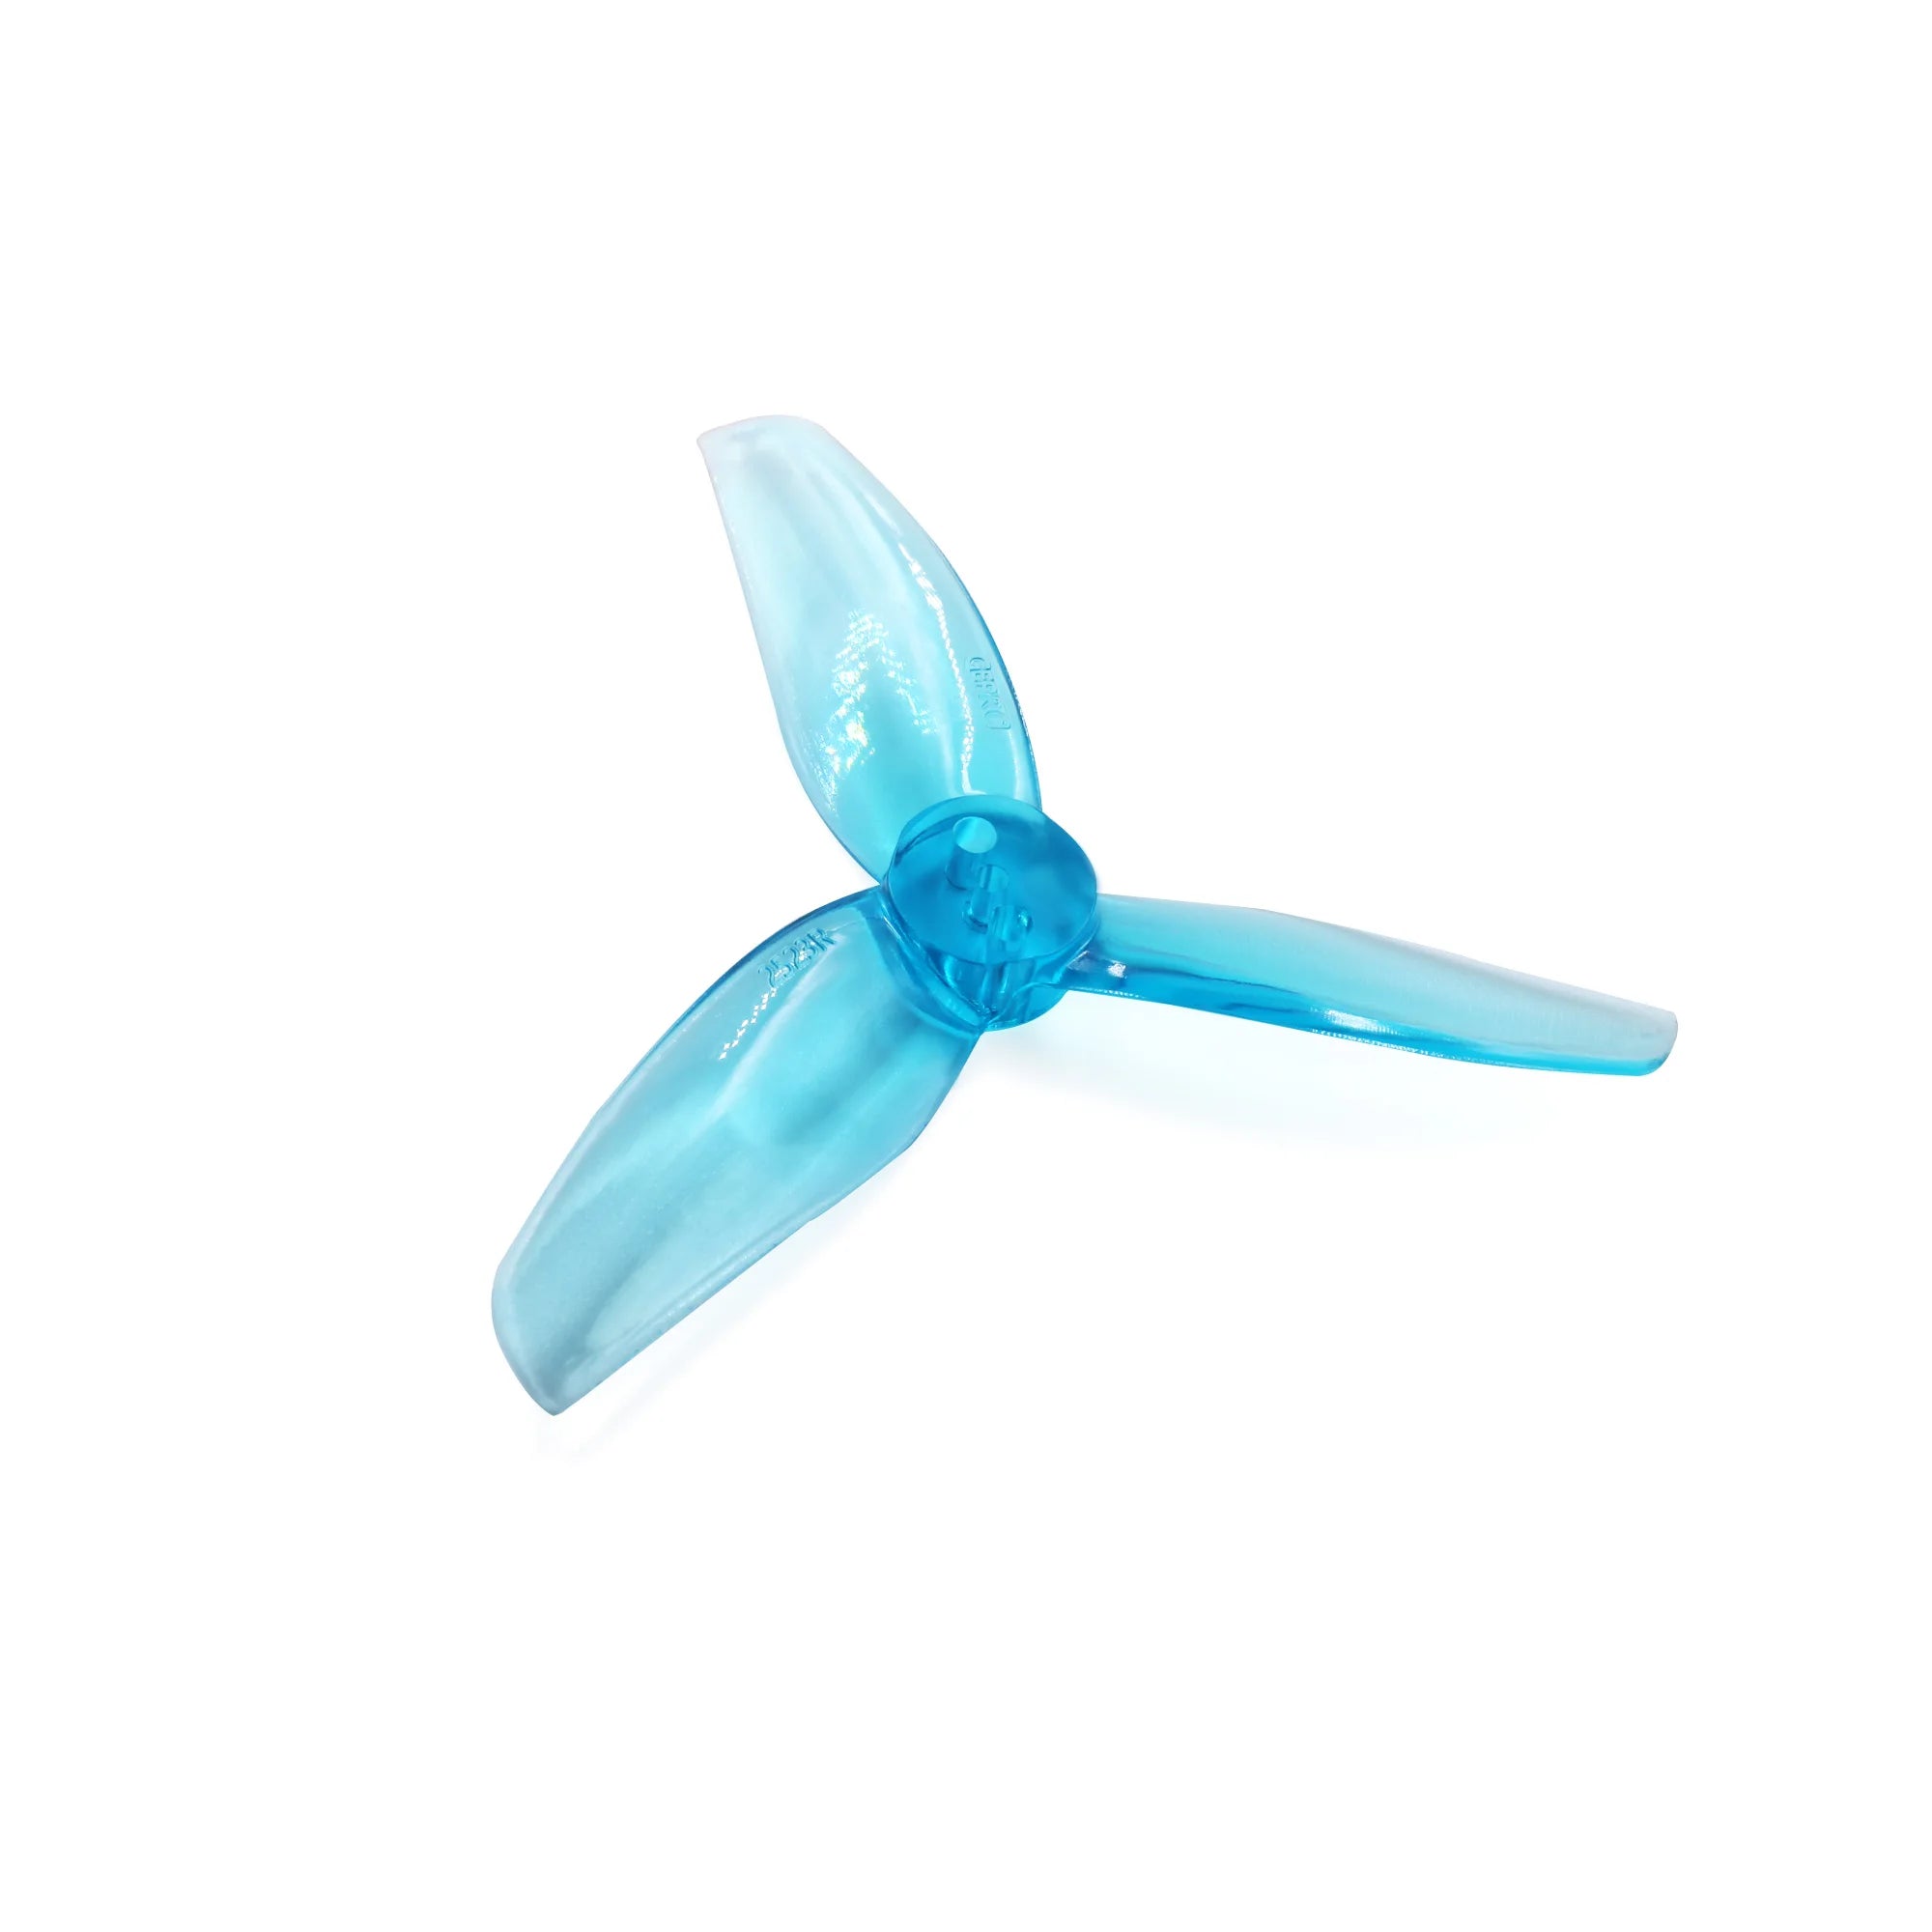 GEPRC G2523 Propeller, G2523 propeller is very solid and has enough toughness, which can effectively reduce crash